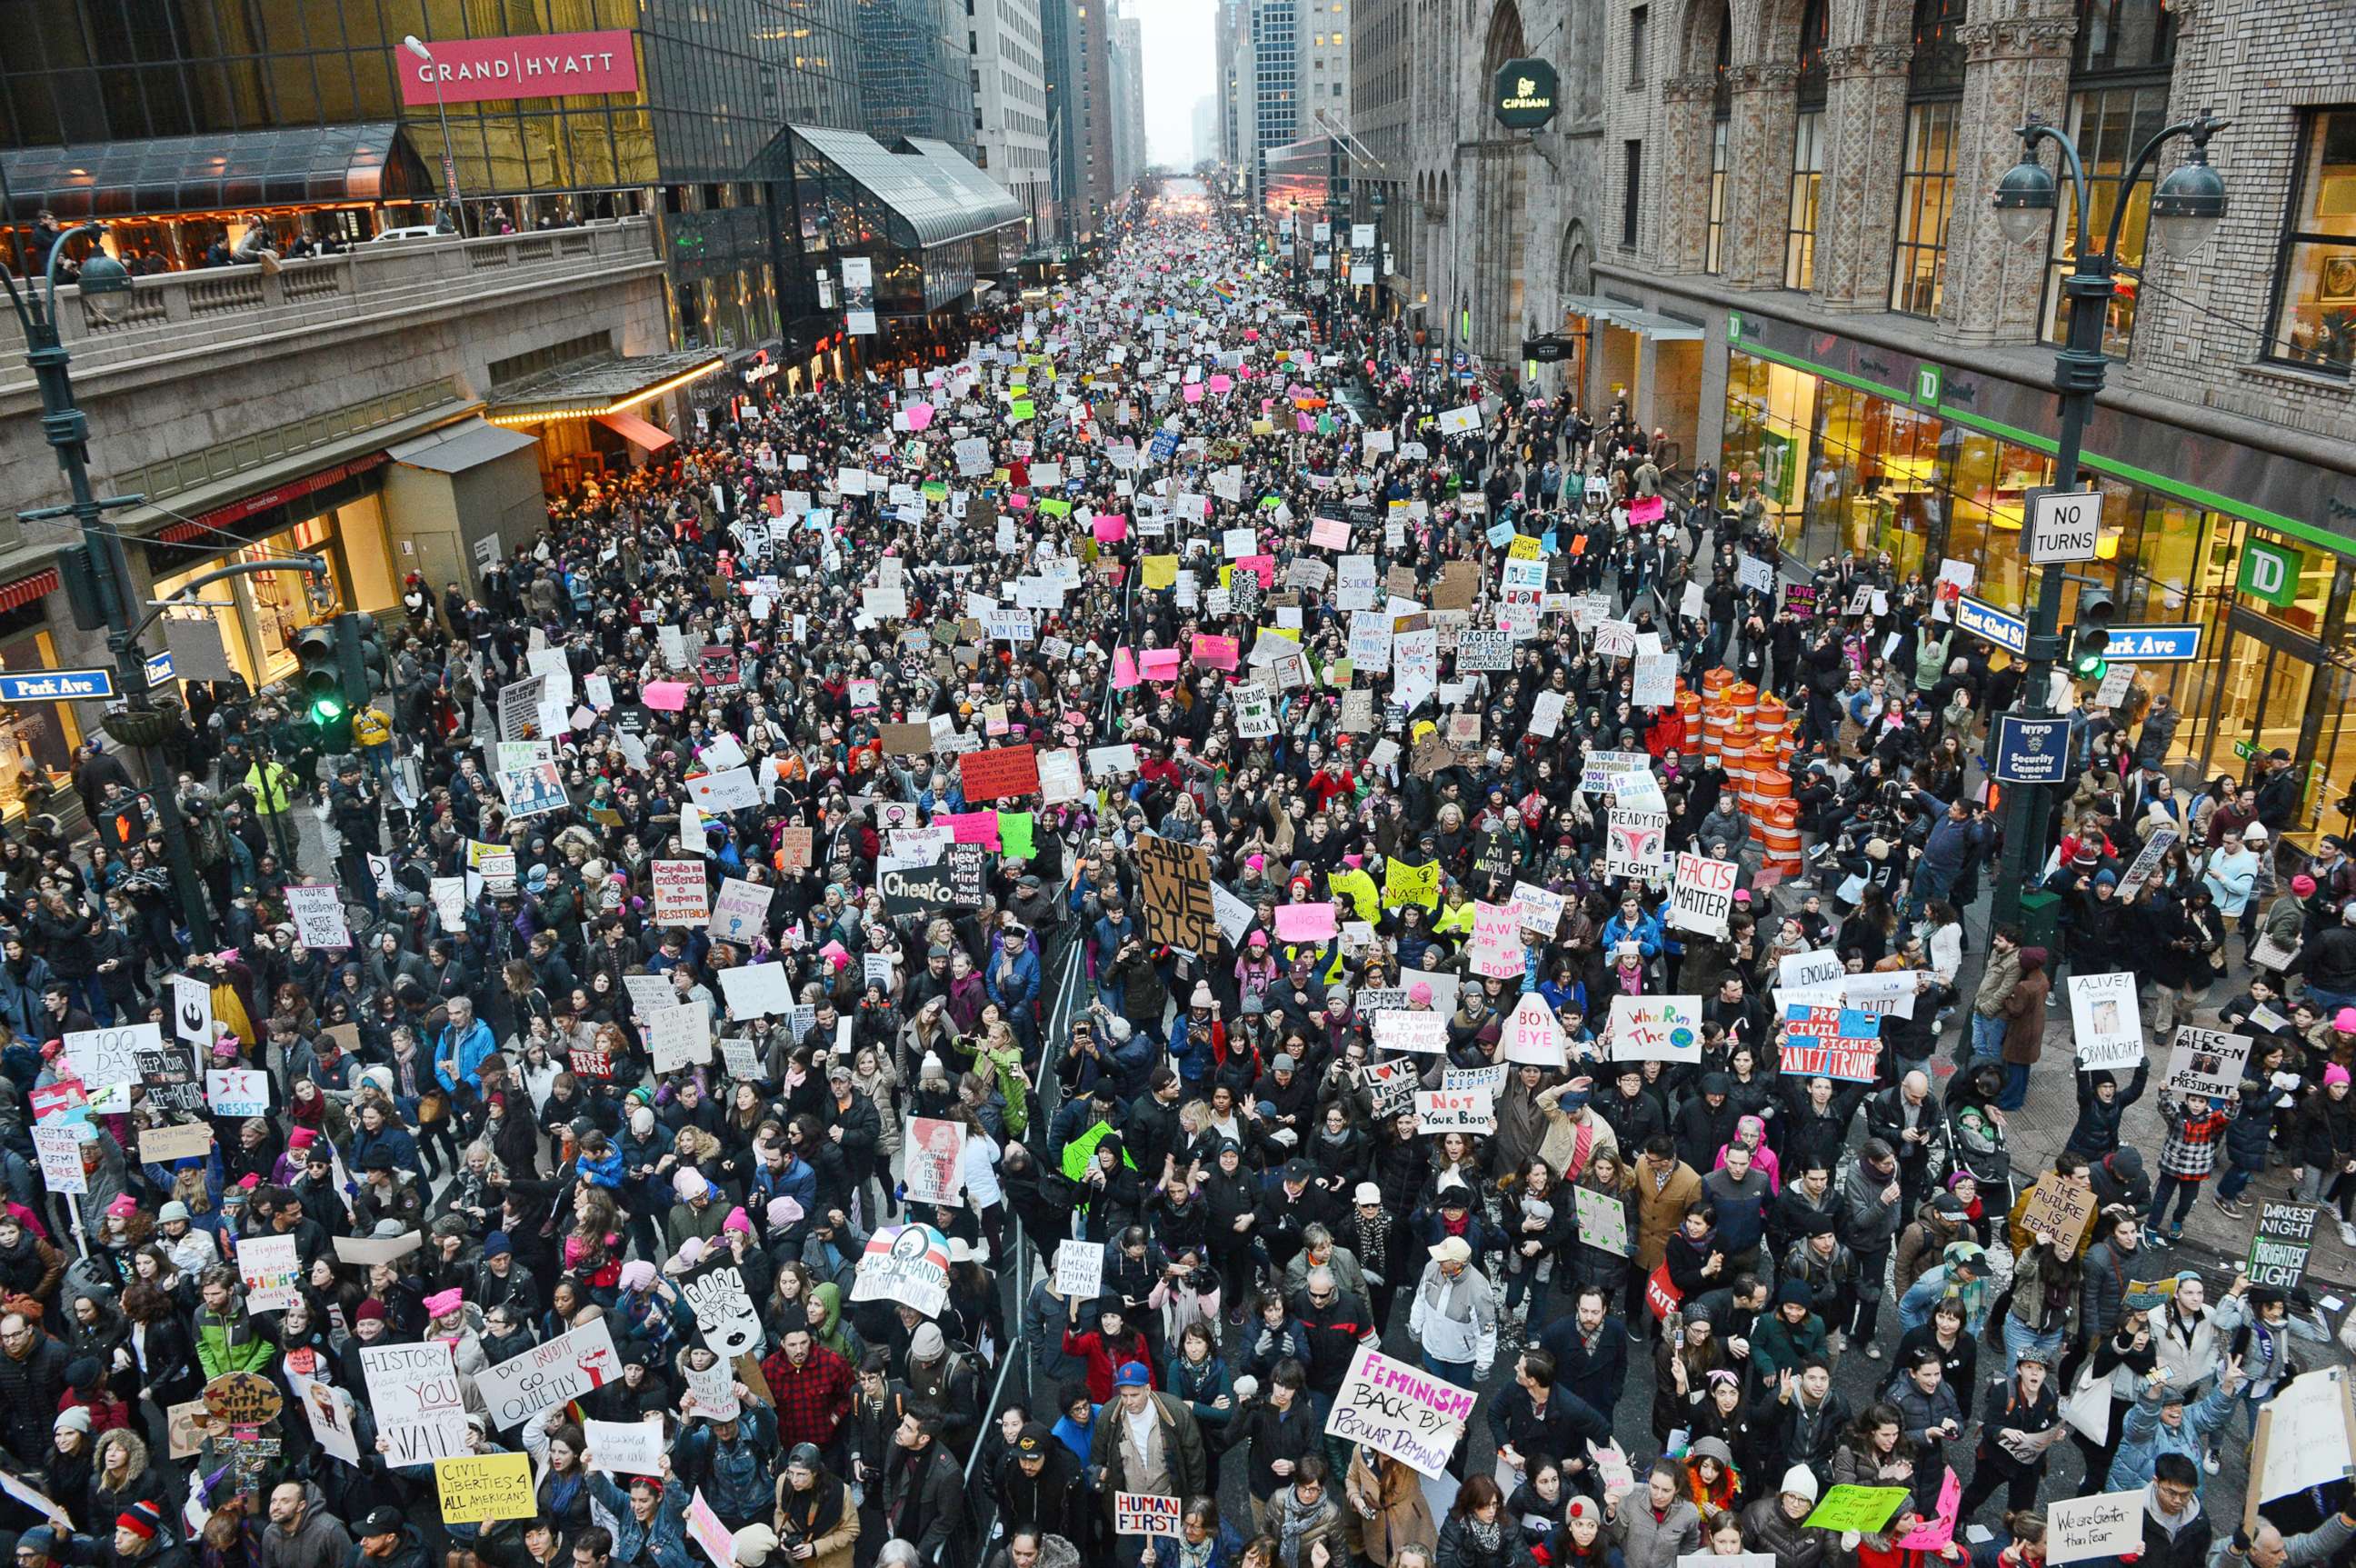 PHOTO: In this Jan. 21, 2017, file photo, thousands of participants converge on Dag Hammarskjold Plaza and 2nd Avenue during the Women's March in New York.